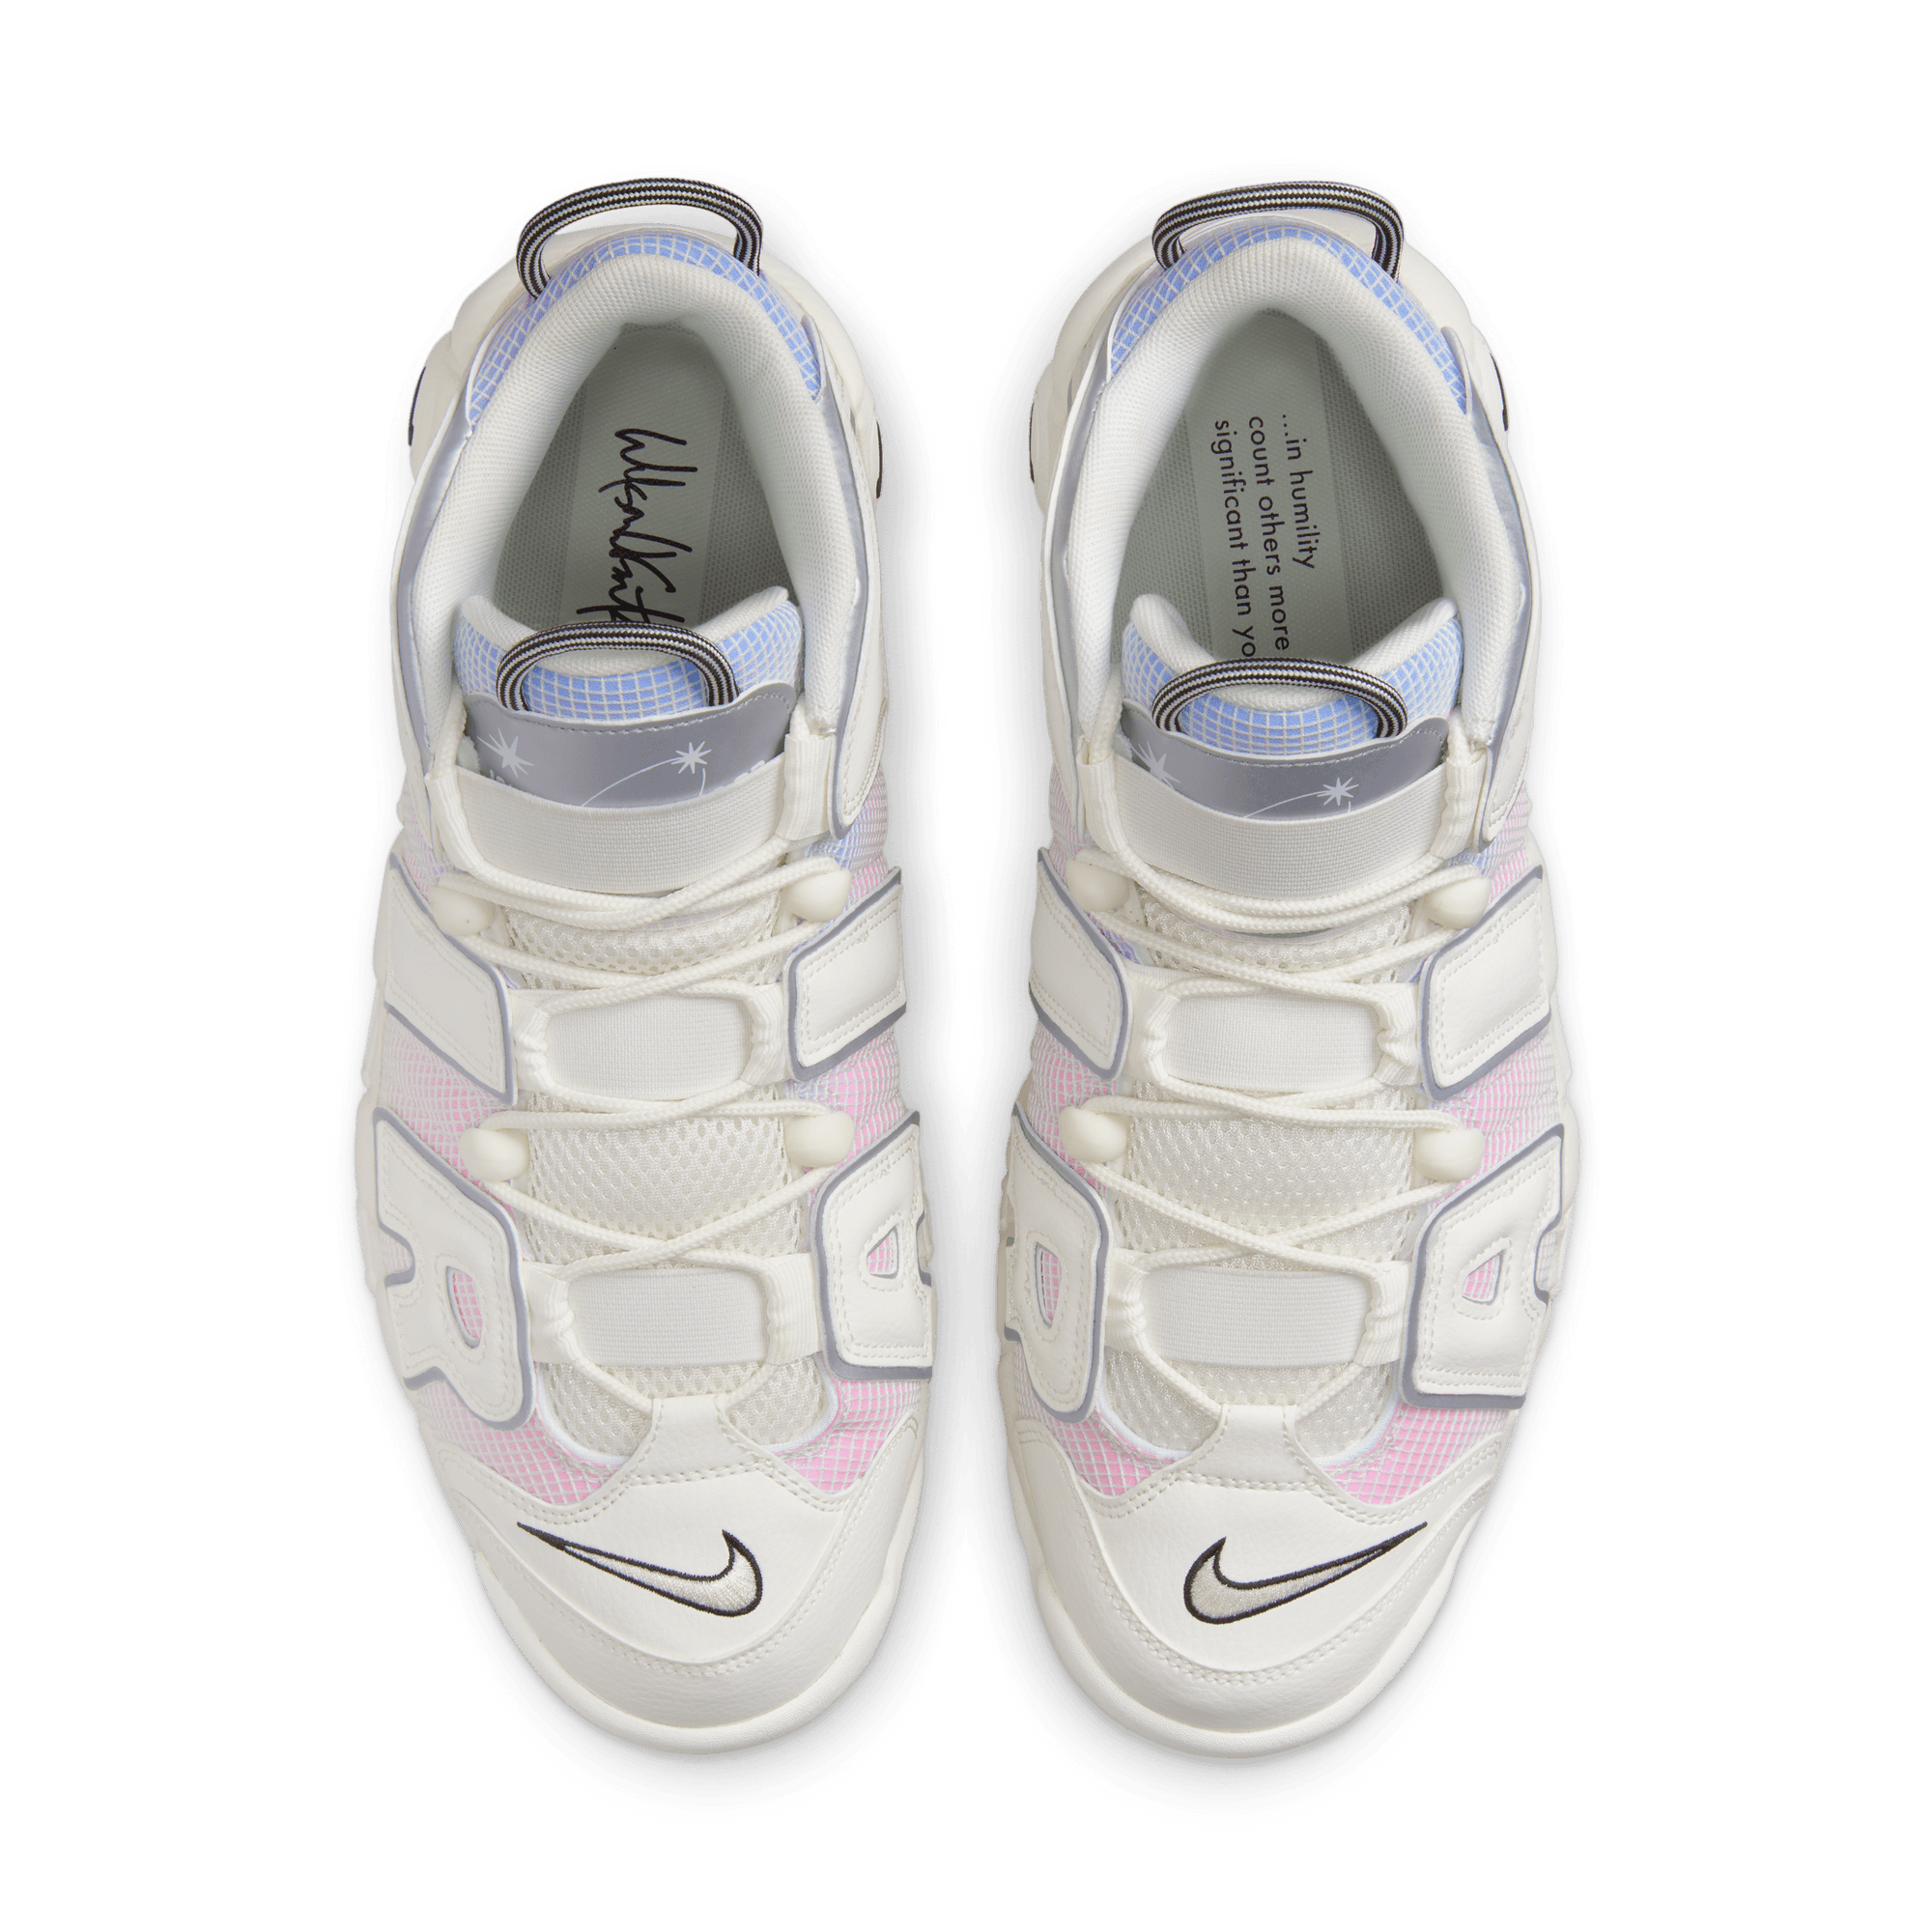 GBNY Nike Air More Uptempo White Pink Purple - Men's DR9612-100